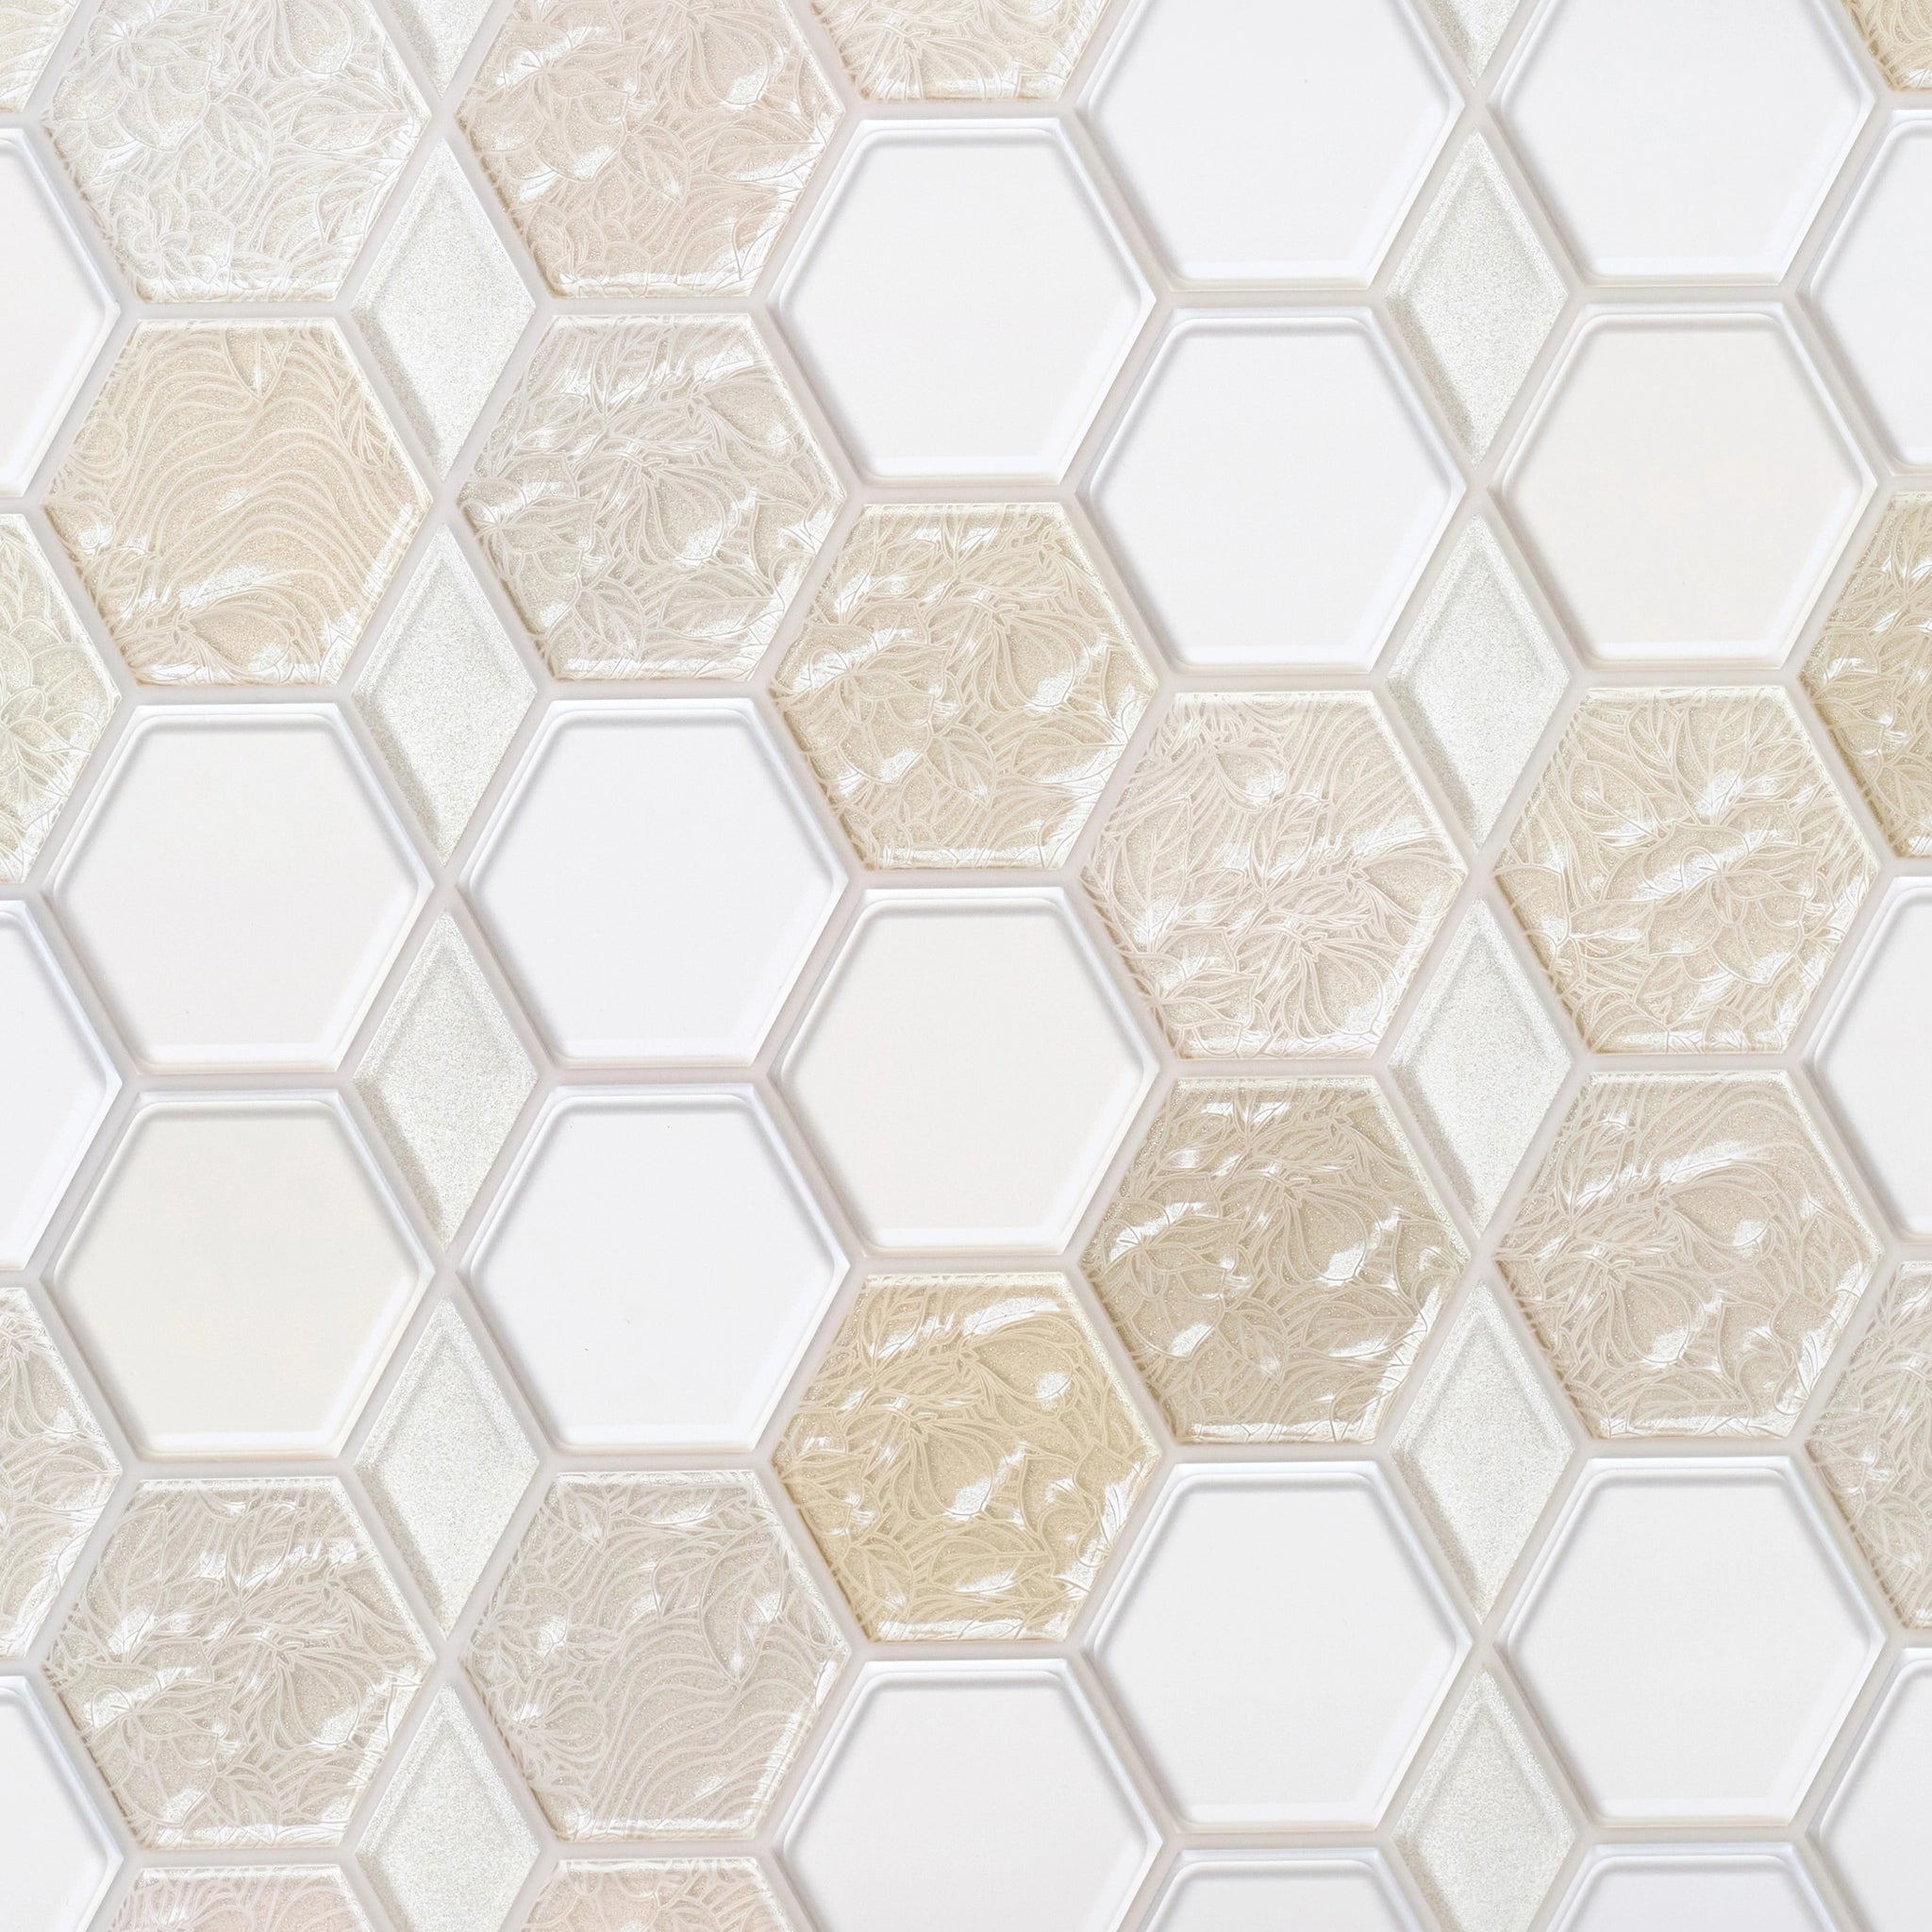 Close-up of white & beige wall panel with geometric designs